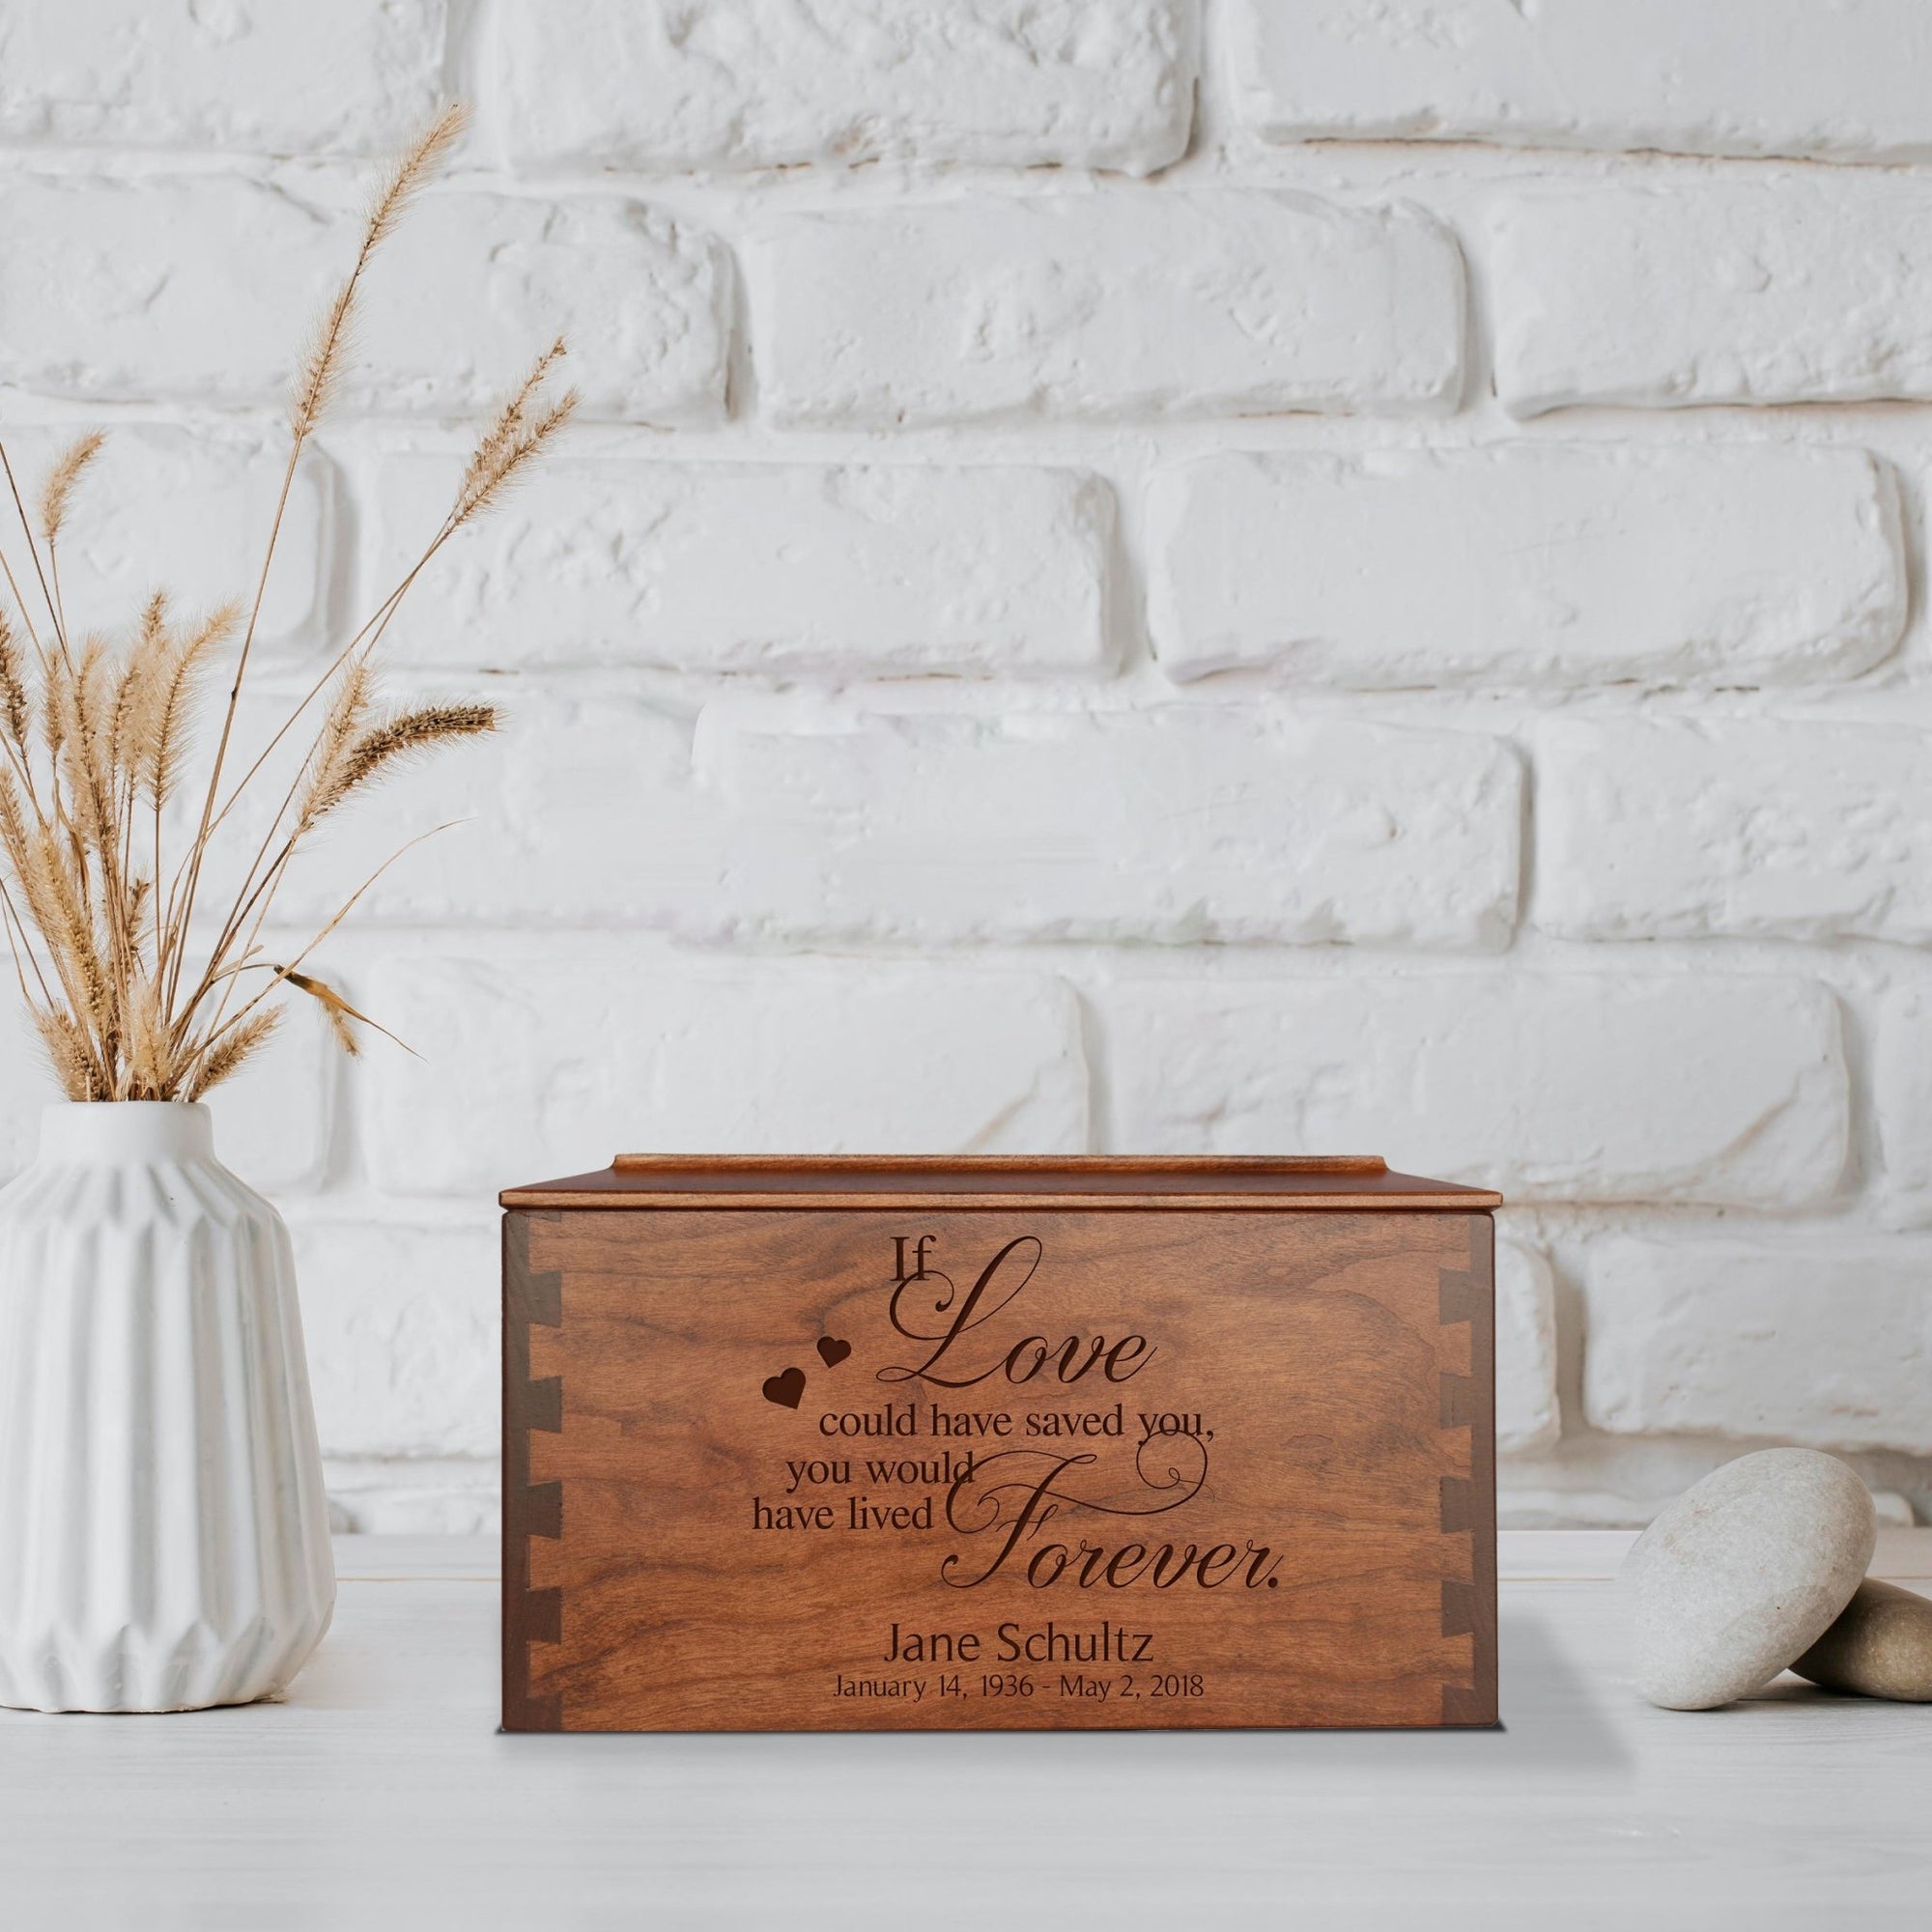 Custom Wooden Cremation Urn Box Large for Human Ashes holds 291 cu in If Love Could Have - LifeSong Milestones